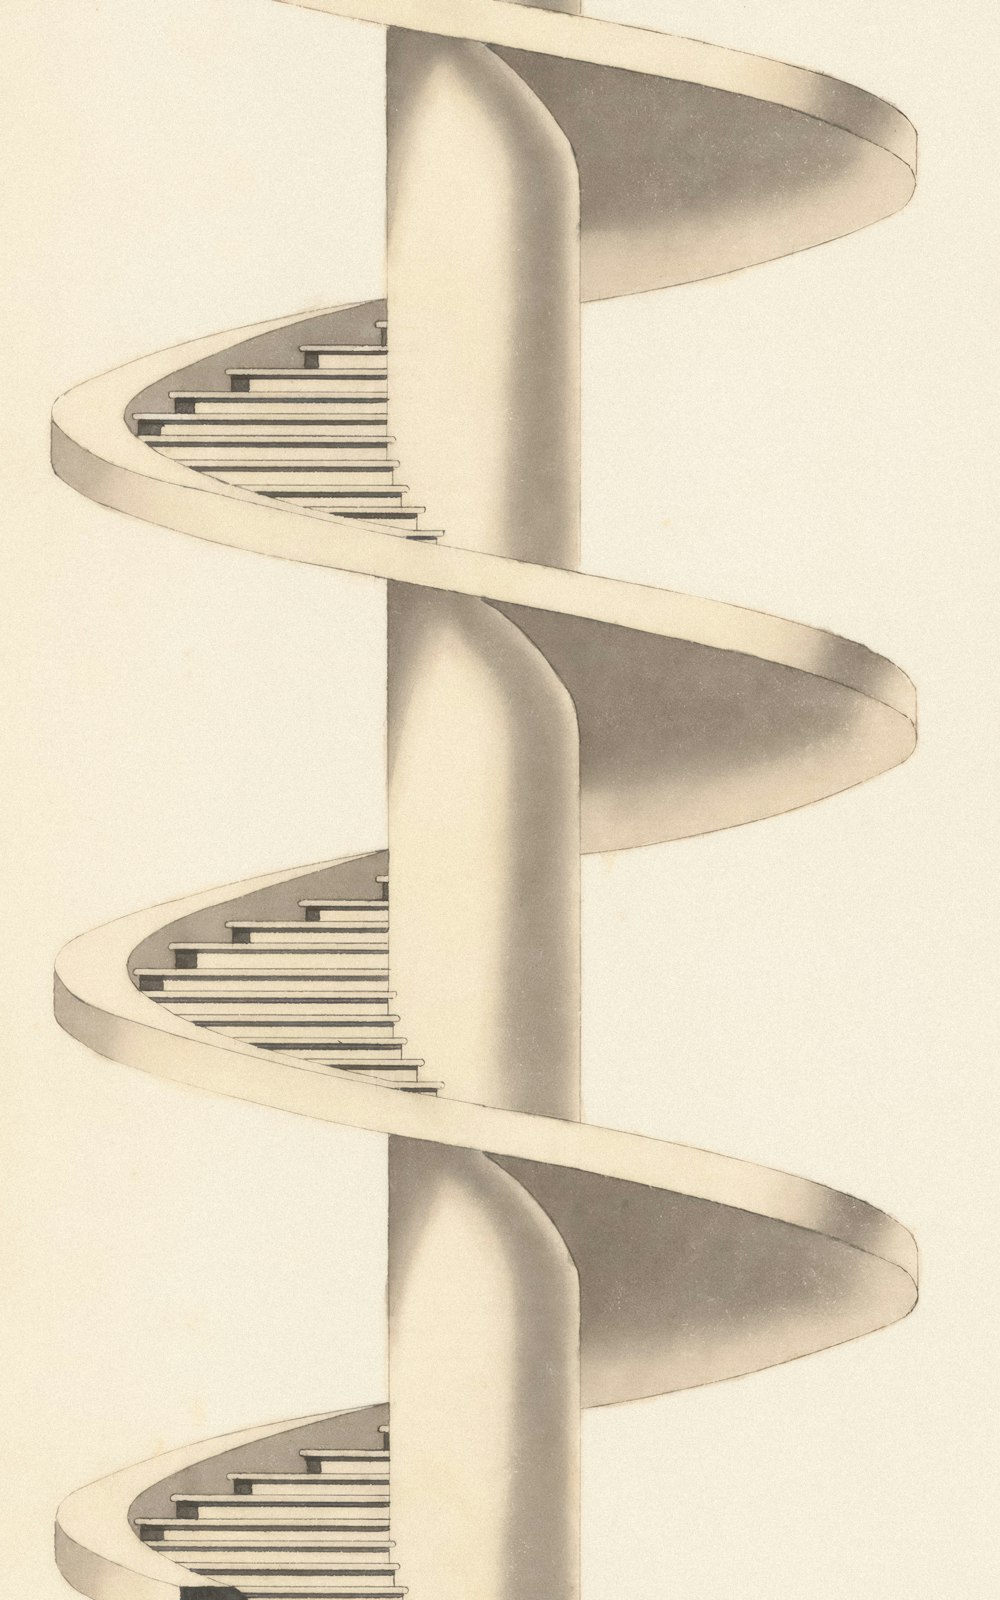 a drawing of a spiral staircase in a building